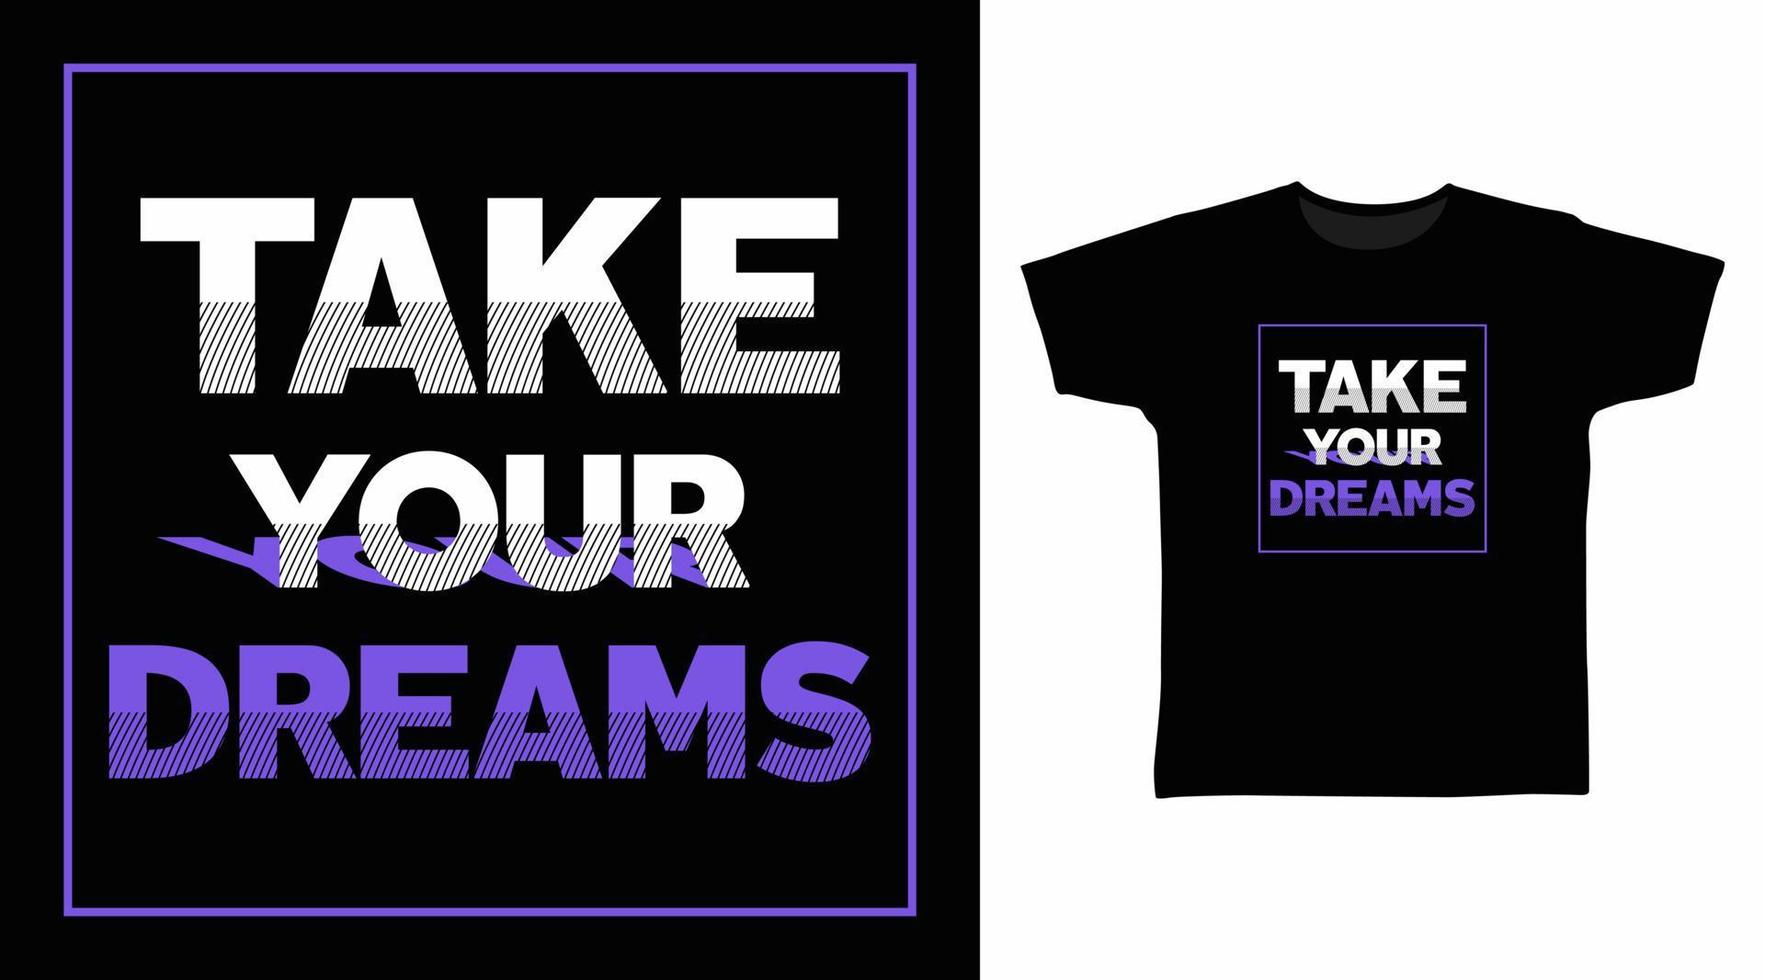 Take your dreams typography quotes design vector illustration ready for print on t-shirt